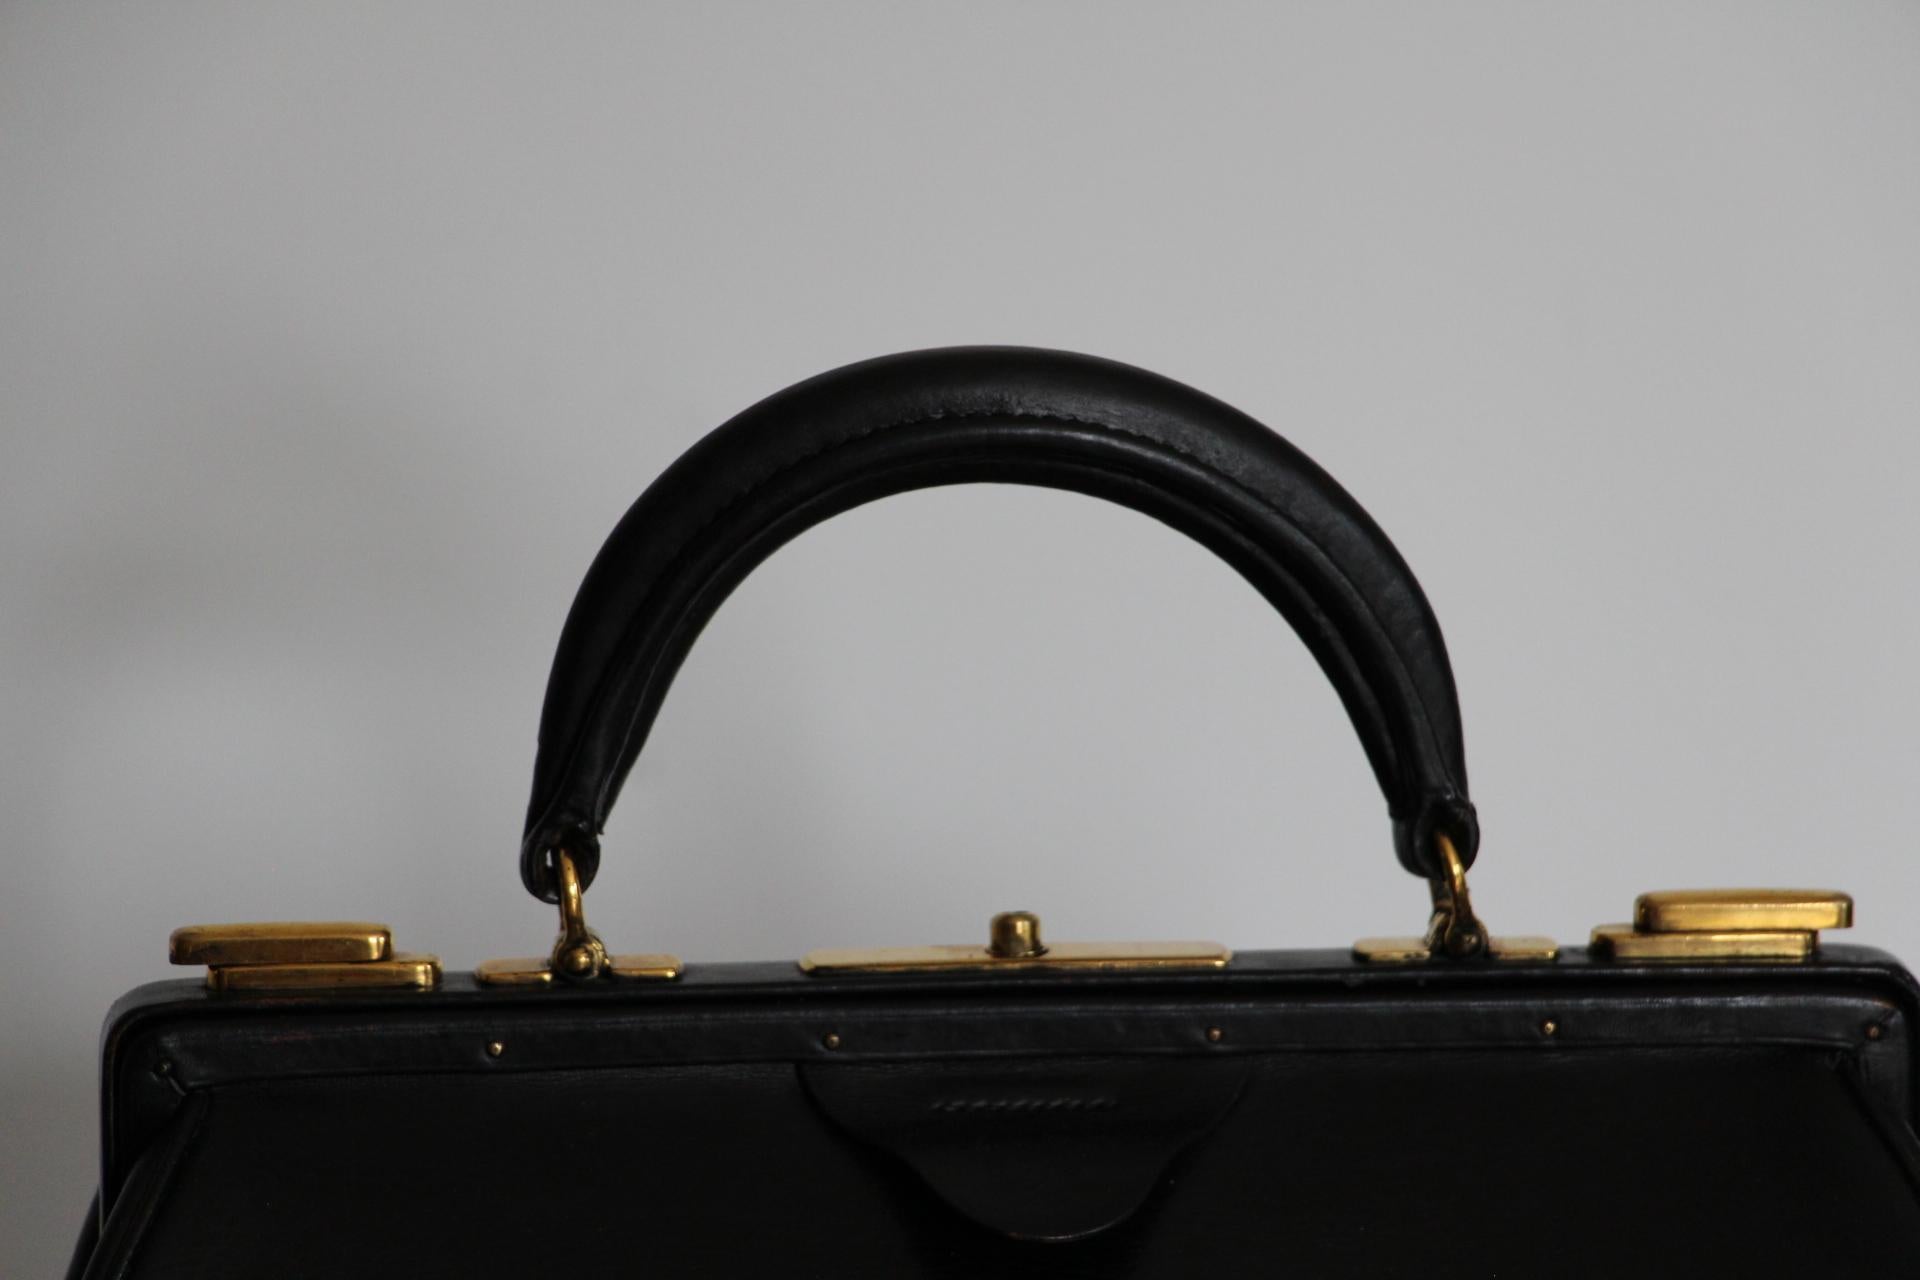 Hermes Vintage Sac Mallette was originally designed in the 1920's .Very unusual, this exceptionally stunning piece is a must have for all Hermes collectors. It features beautiful, rich black box calf leather. Warm gold tone push locks and clasps